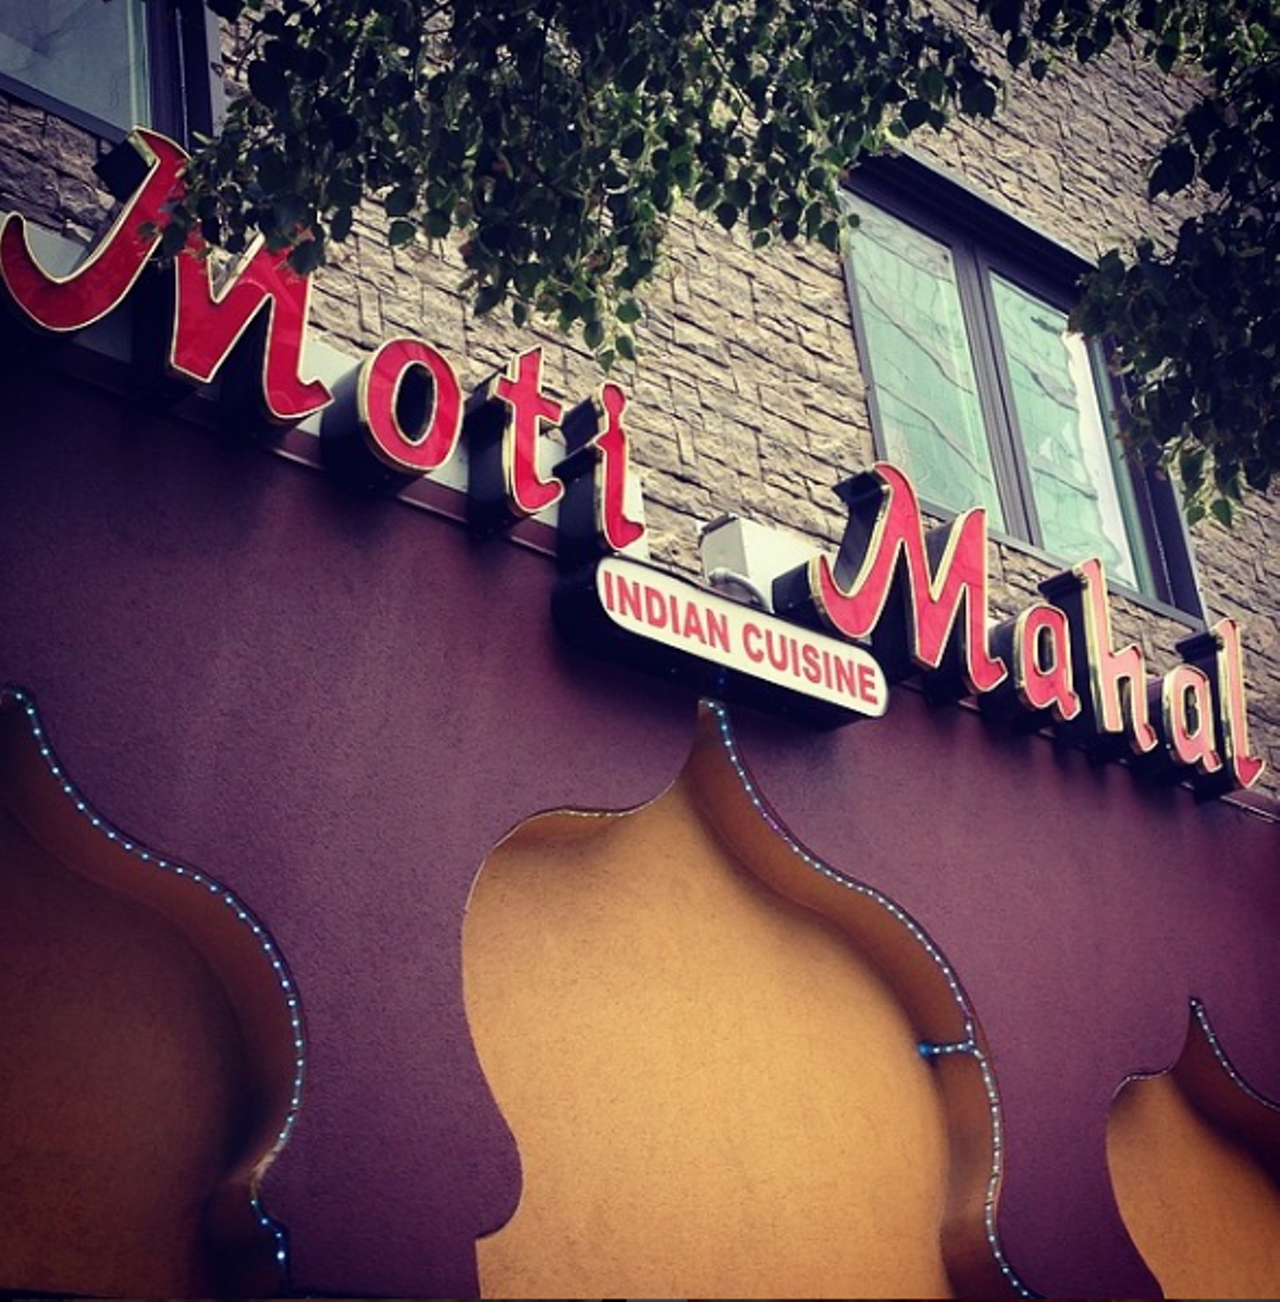 Moti Mahal 
If you&#146;re in the mood for Indian cuisine, look no further than Moti Mahal. This restaurant has so many vegetarian options, you&#146;ll be able to find something for everyone.
Monday to Friday 11:30AM - 2:30PM, Saturday-Sunday 12:00PM - 3:00PM
411 S. Washington Ave. 
Royal Oak, MI 48067
Photo via IG user @jeff_zupanic